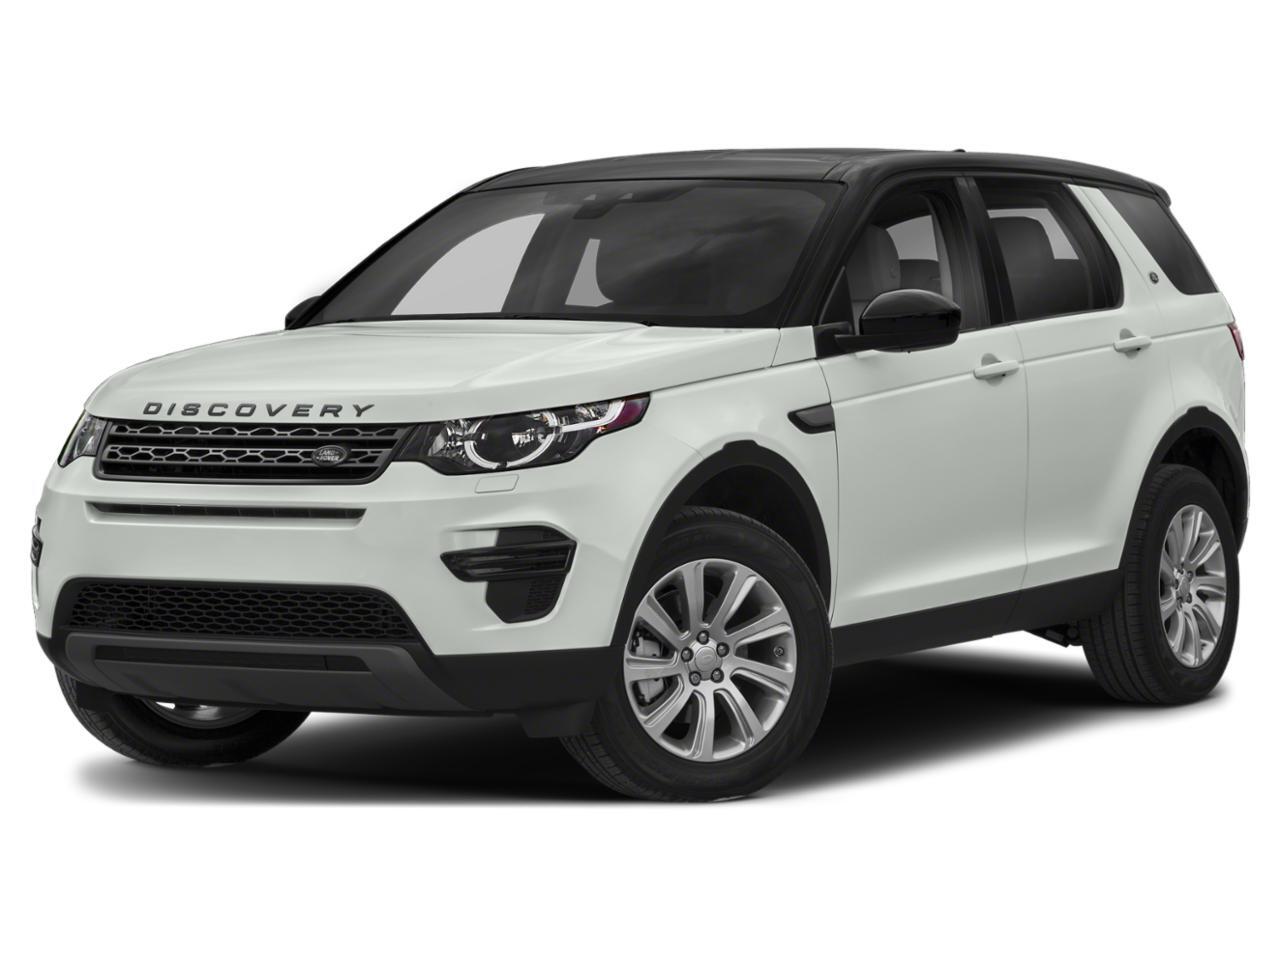 2019 Land Rover Discovery Sport HSE AWD - DLR MNTND | LCL TRADE | LOW KM's